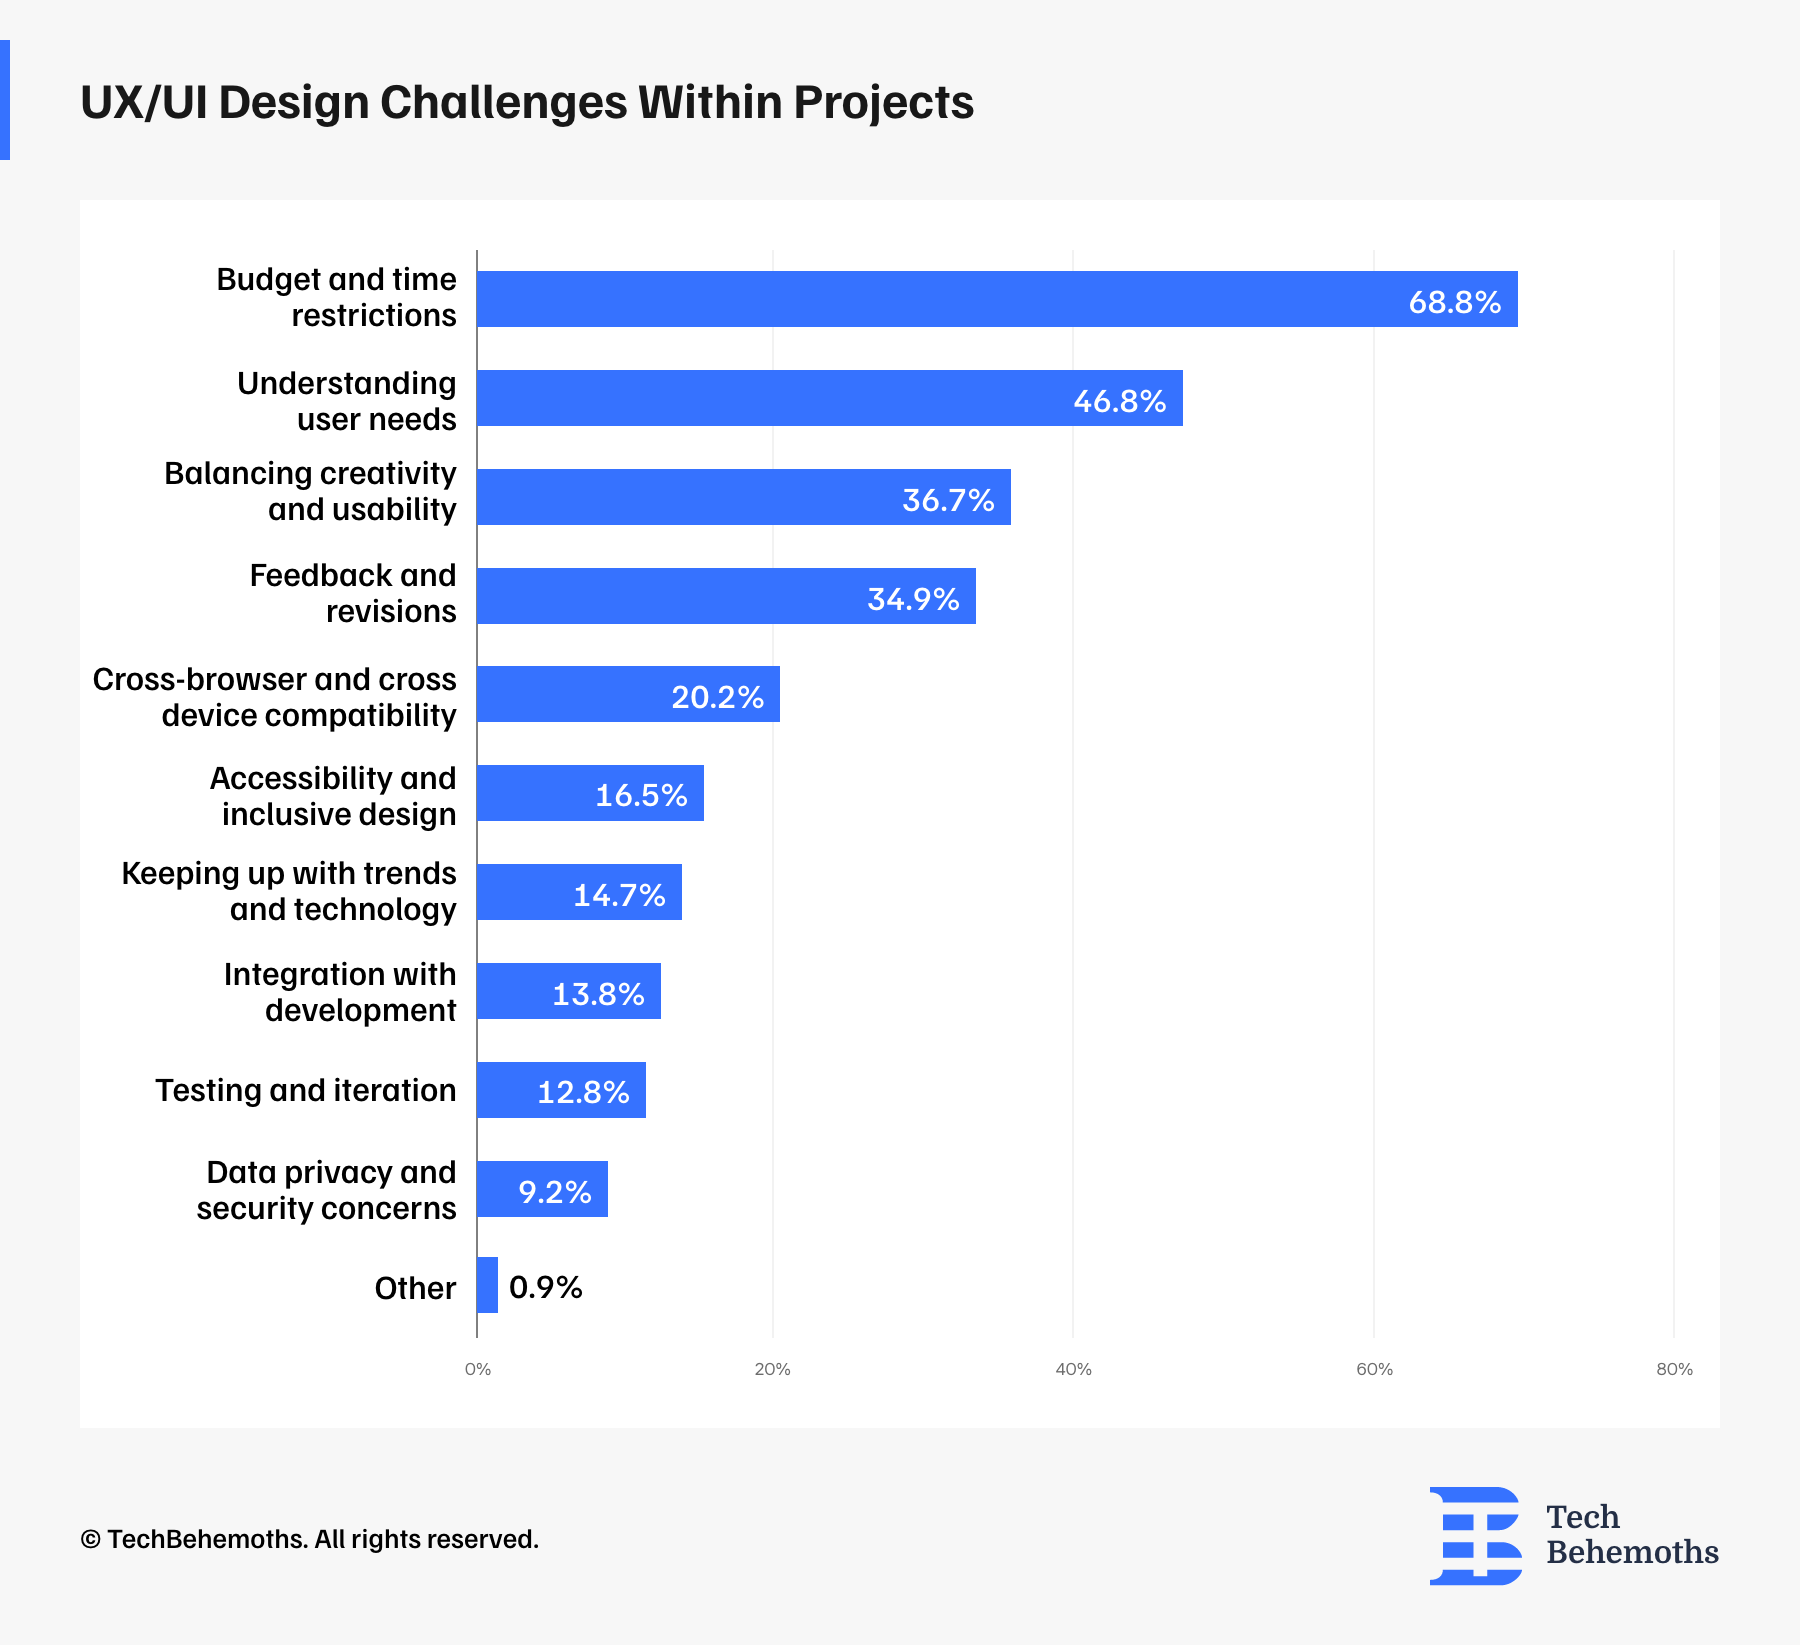 UX/UI Design Challenges Within Projects